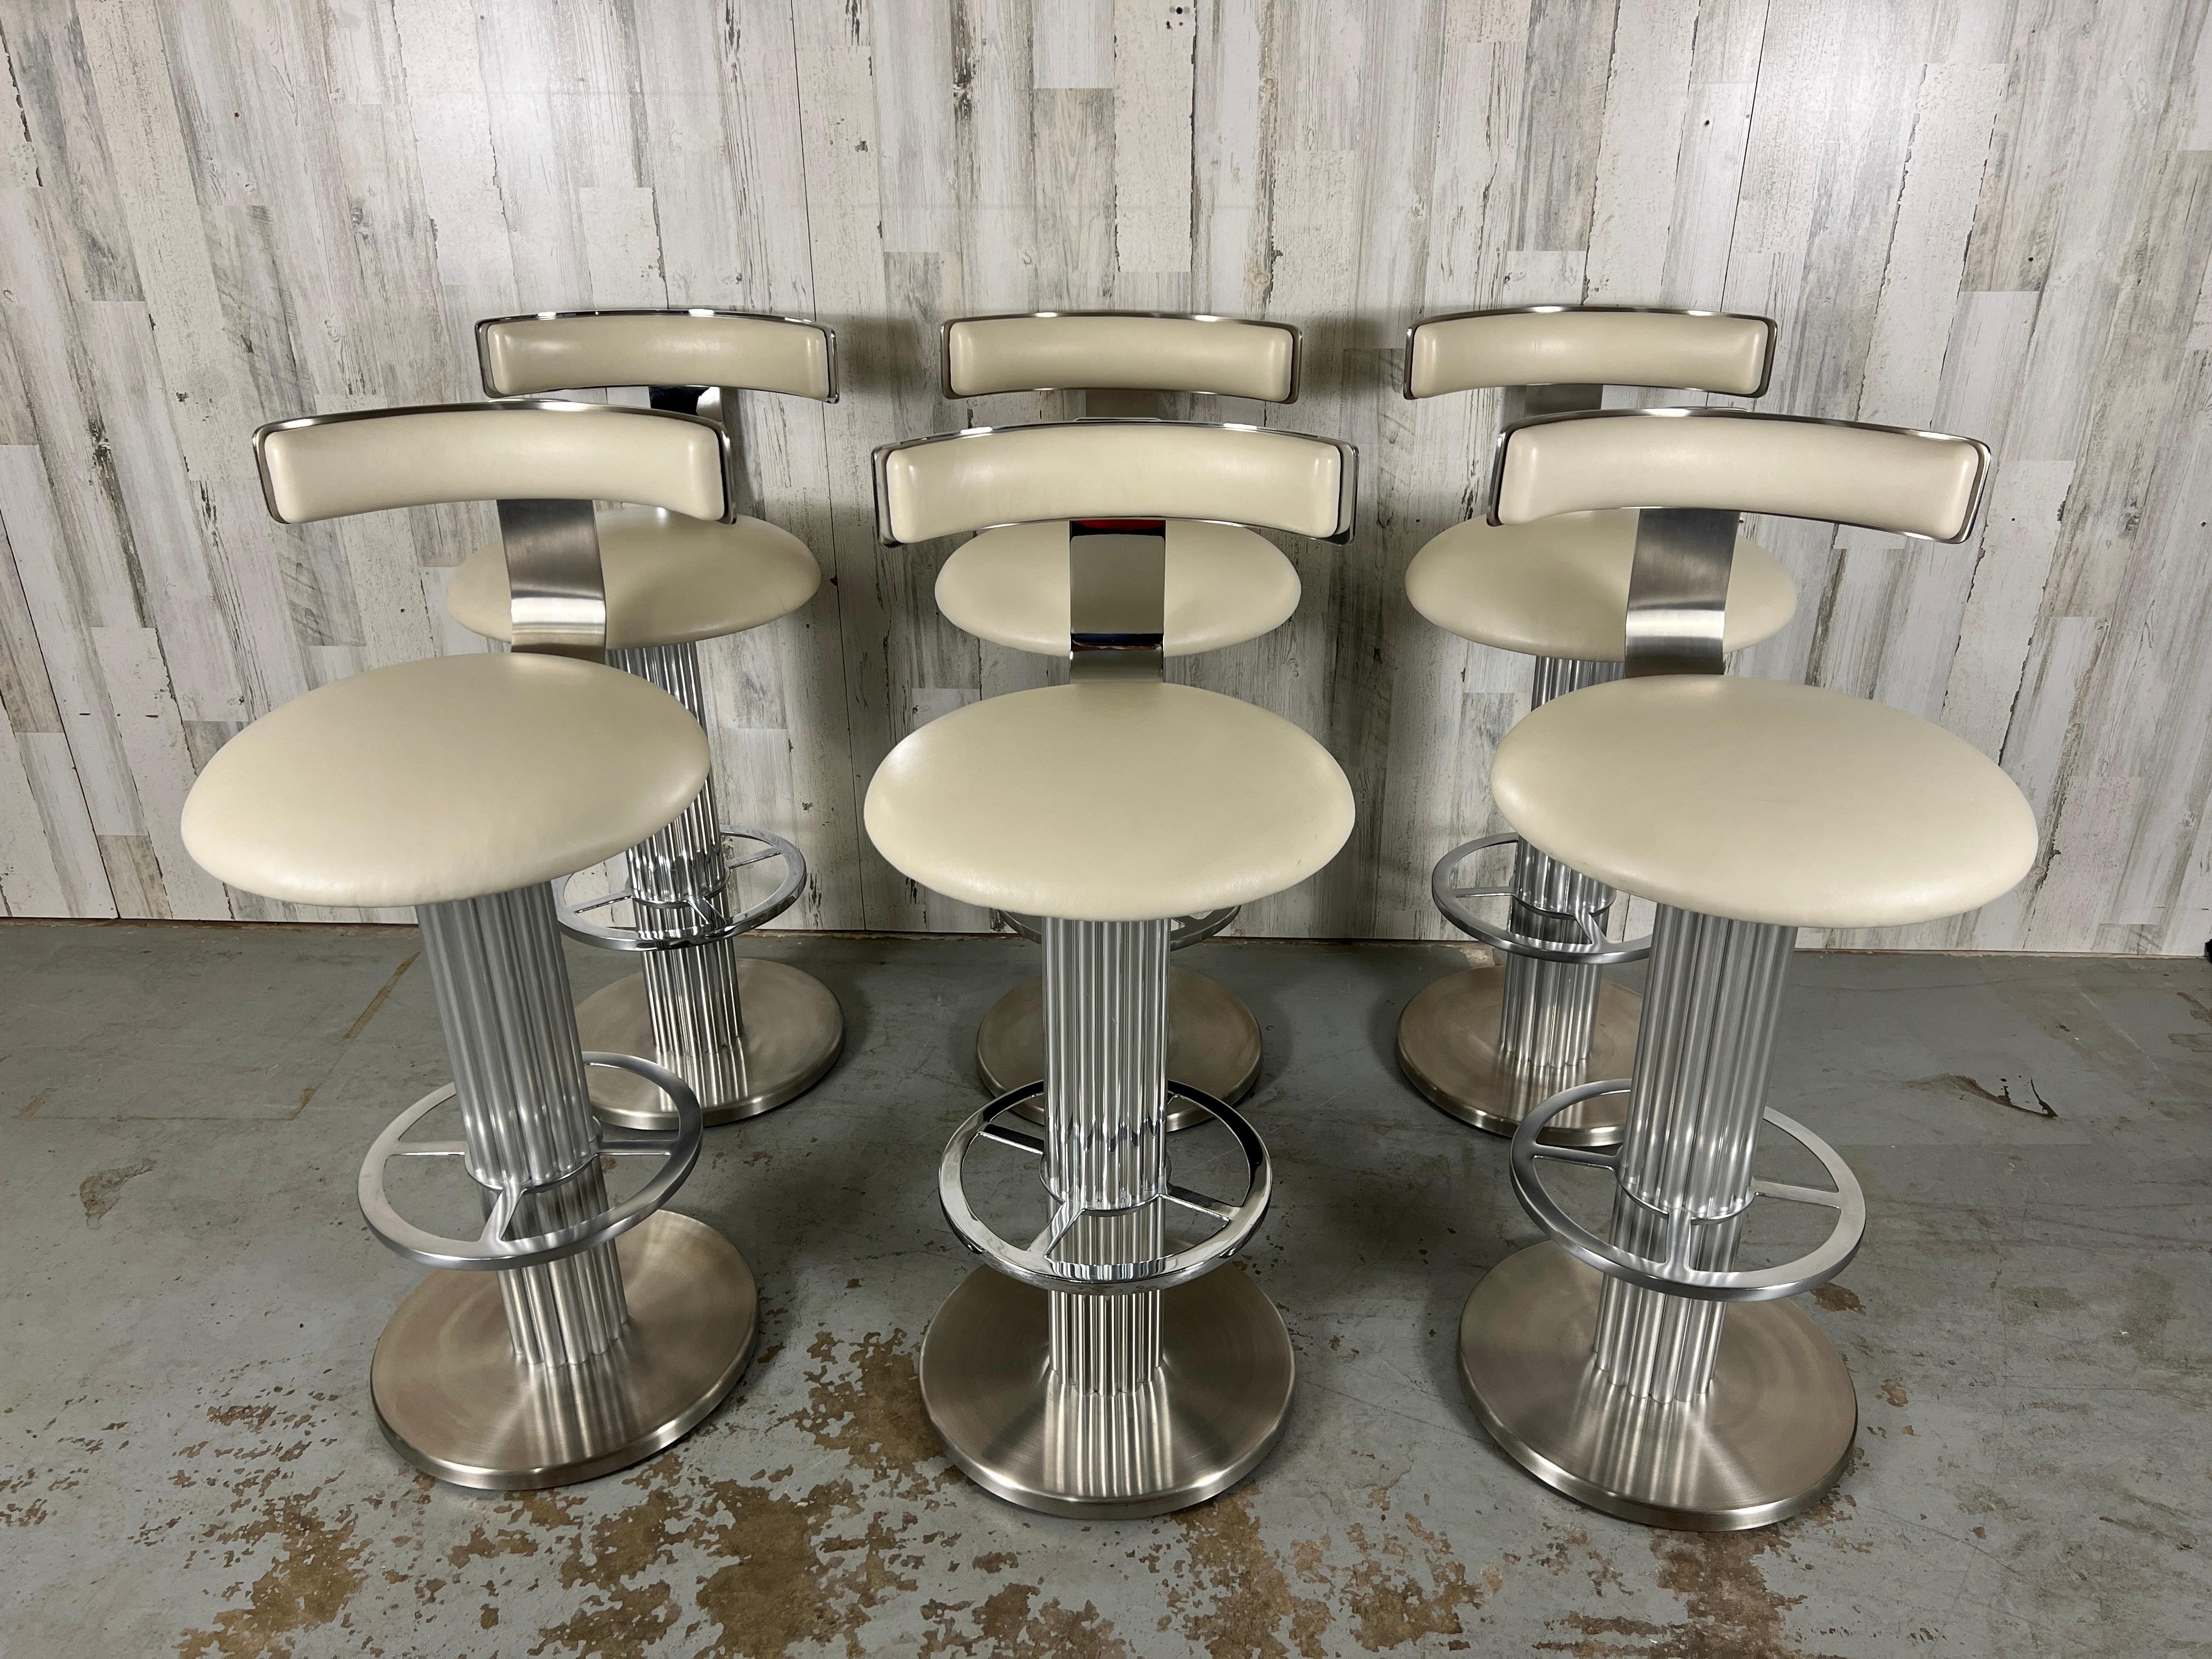 20th Century Design For Leisure Brushed Stainless Steel Bar Stools, Set of 6